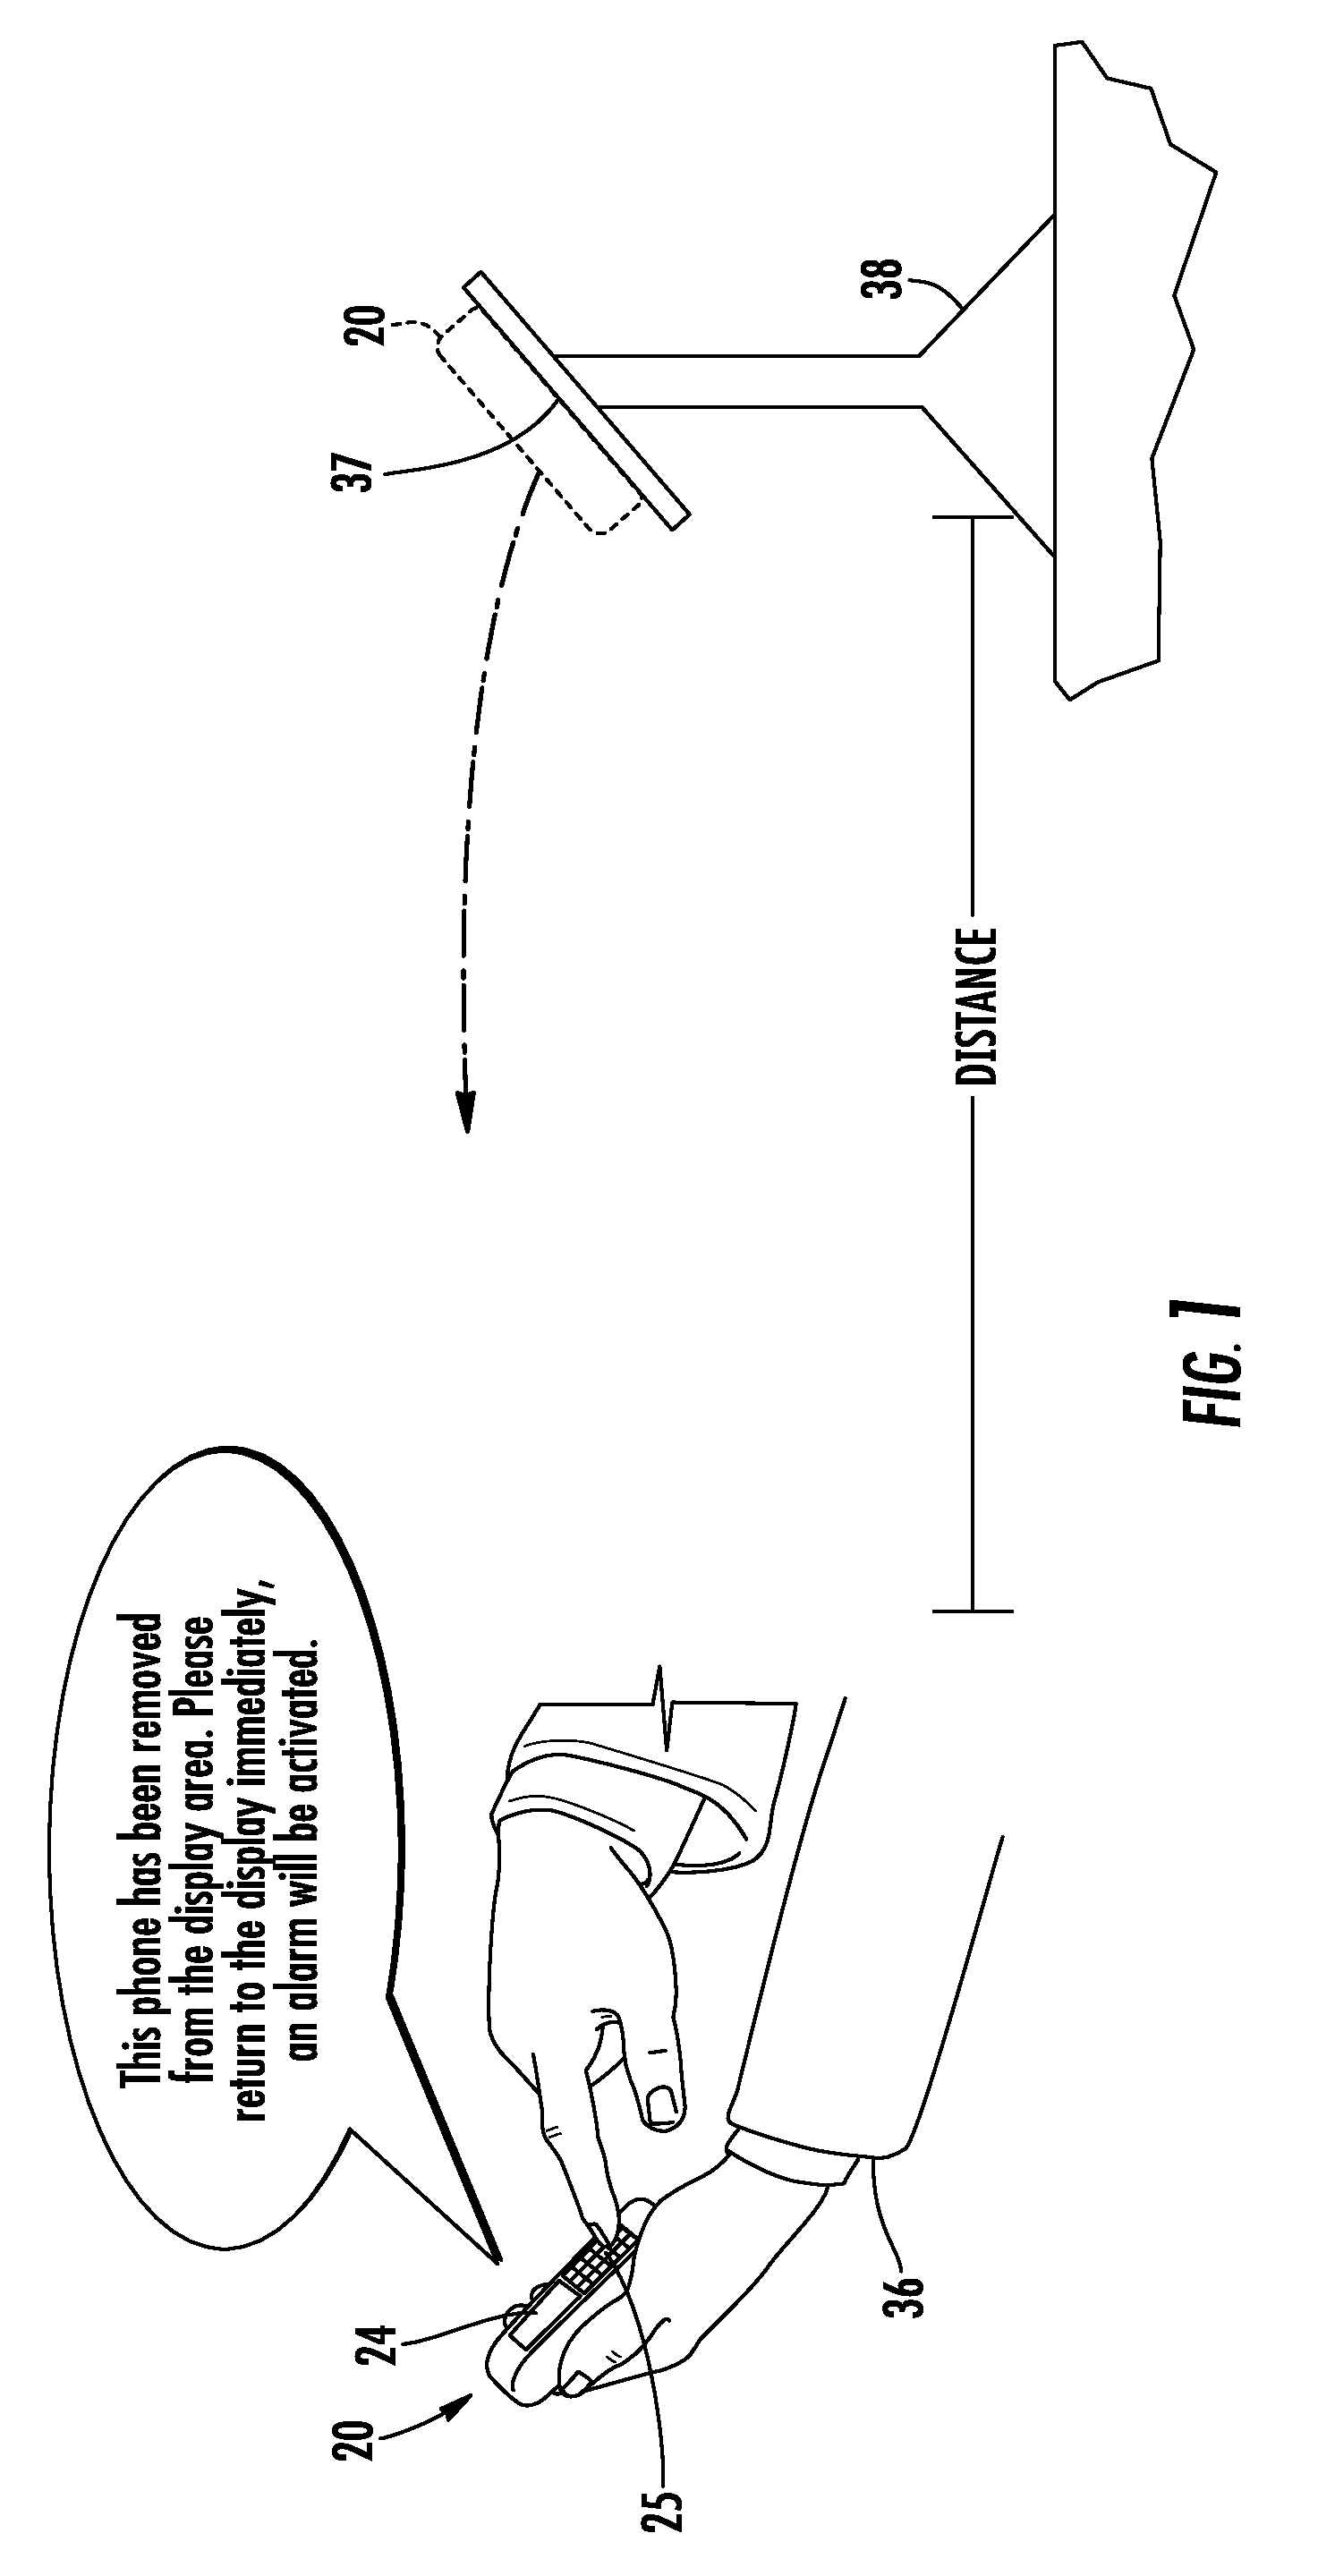 Systems and methods for protecting retail display merchandise from theft